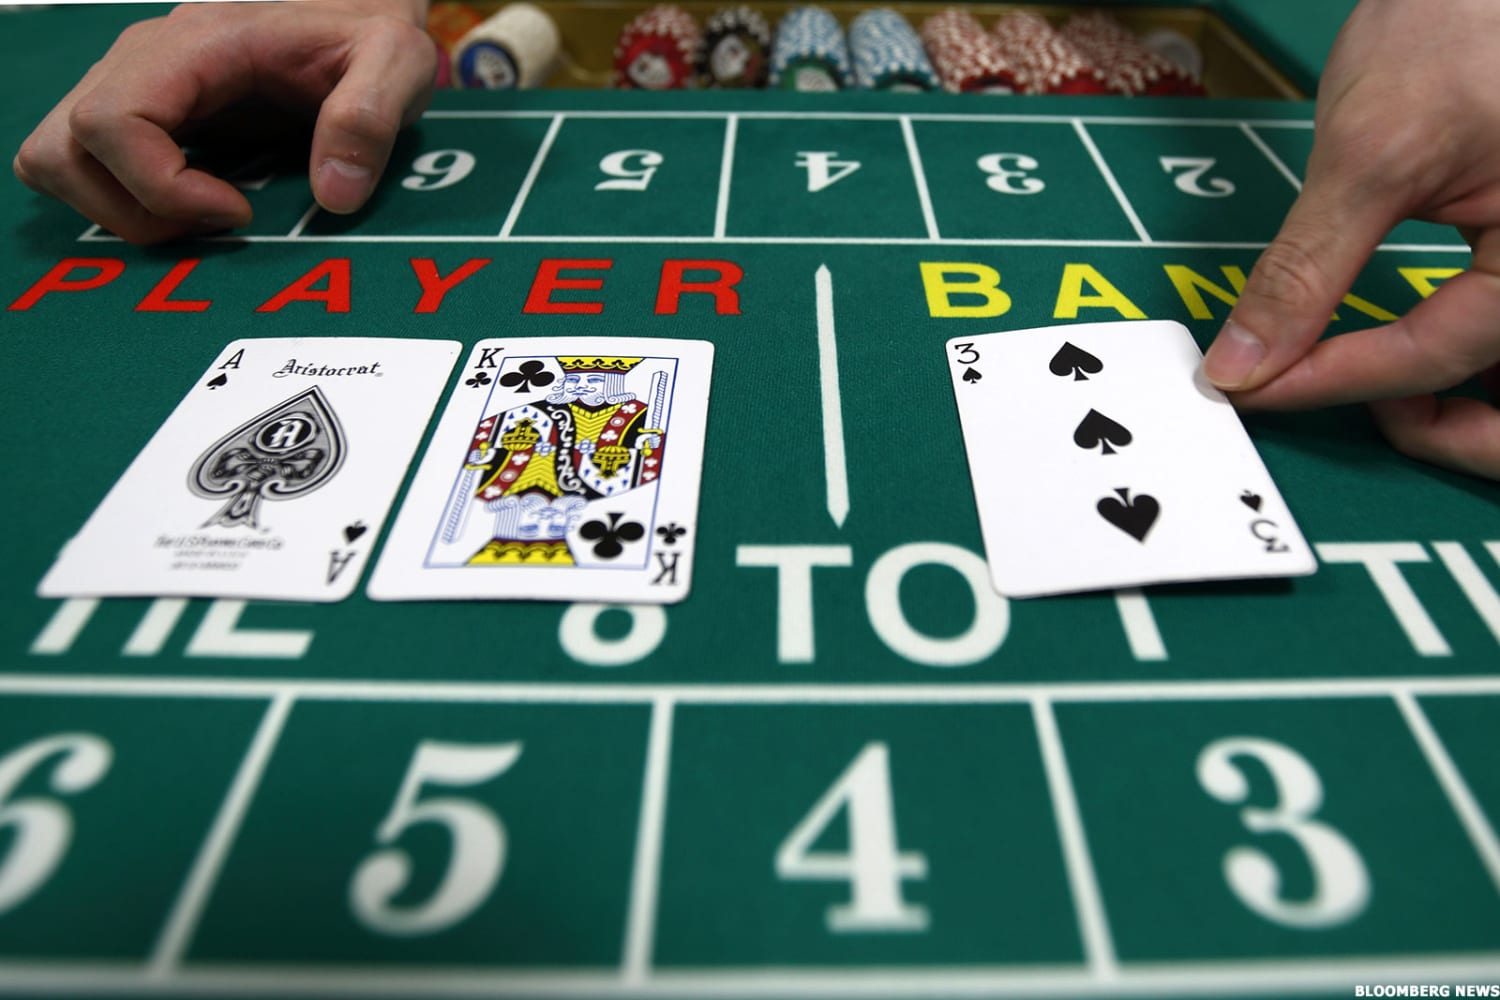 Take a Poker Player's Approach to Playing Small Biotech Stocks